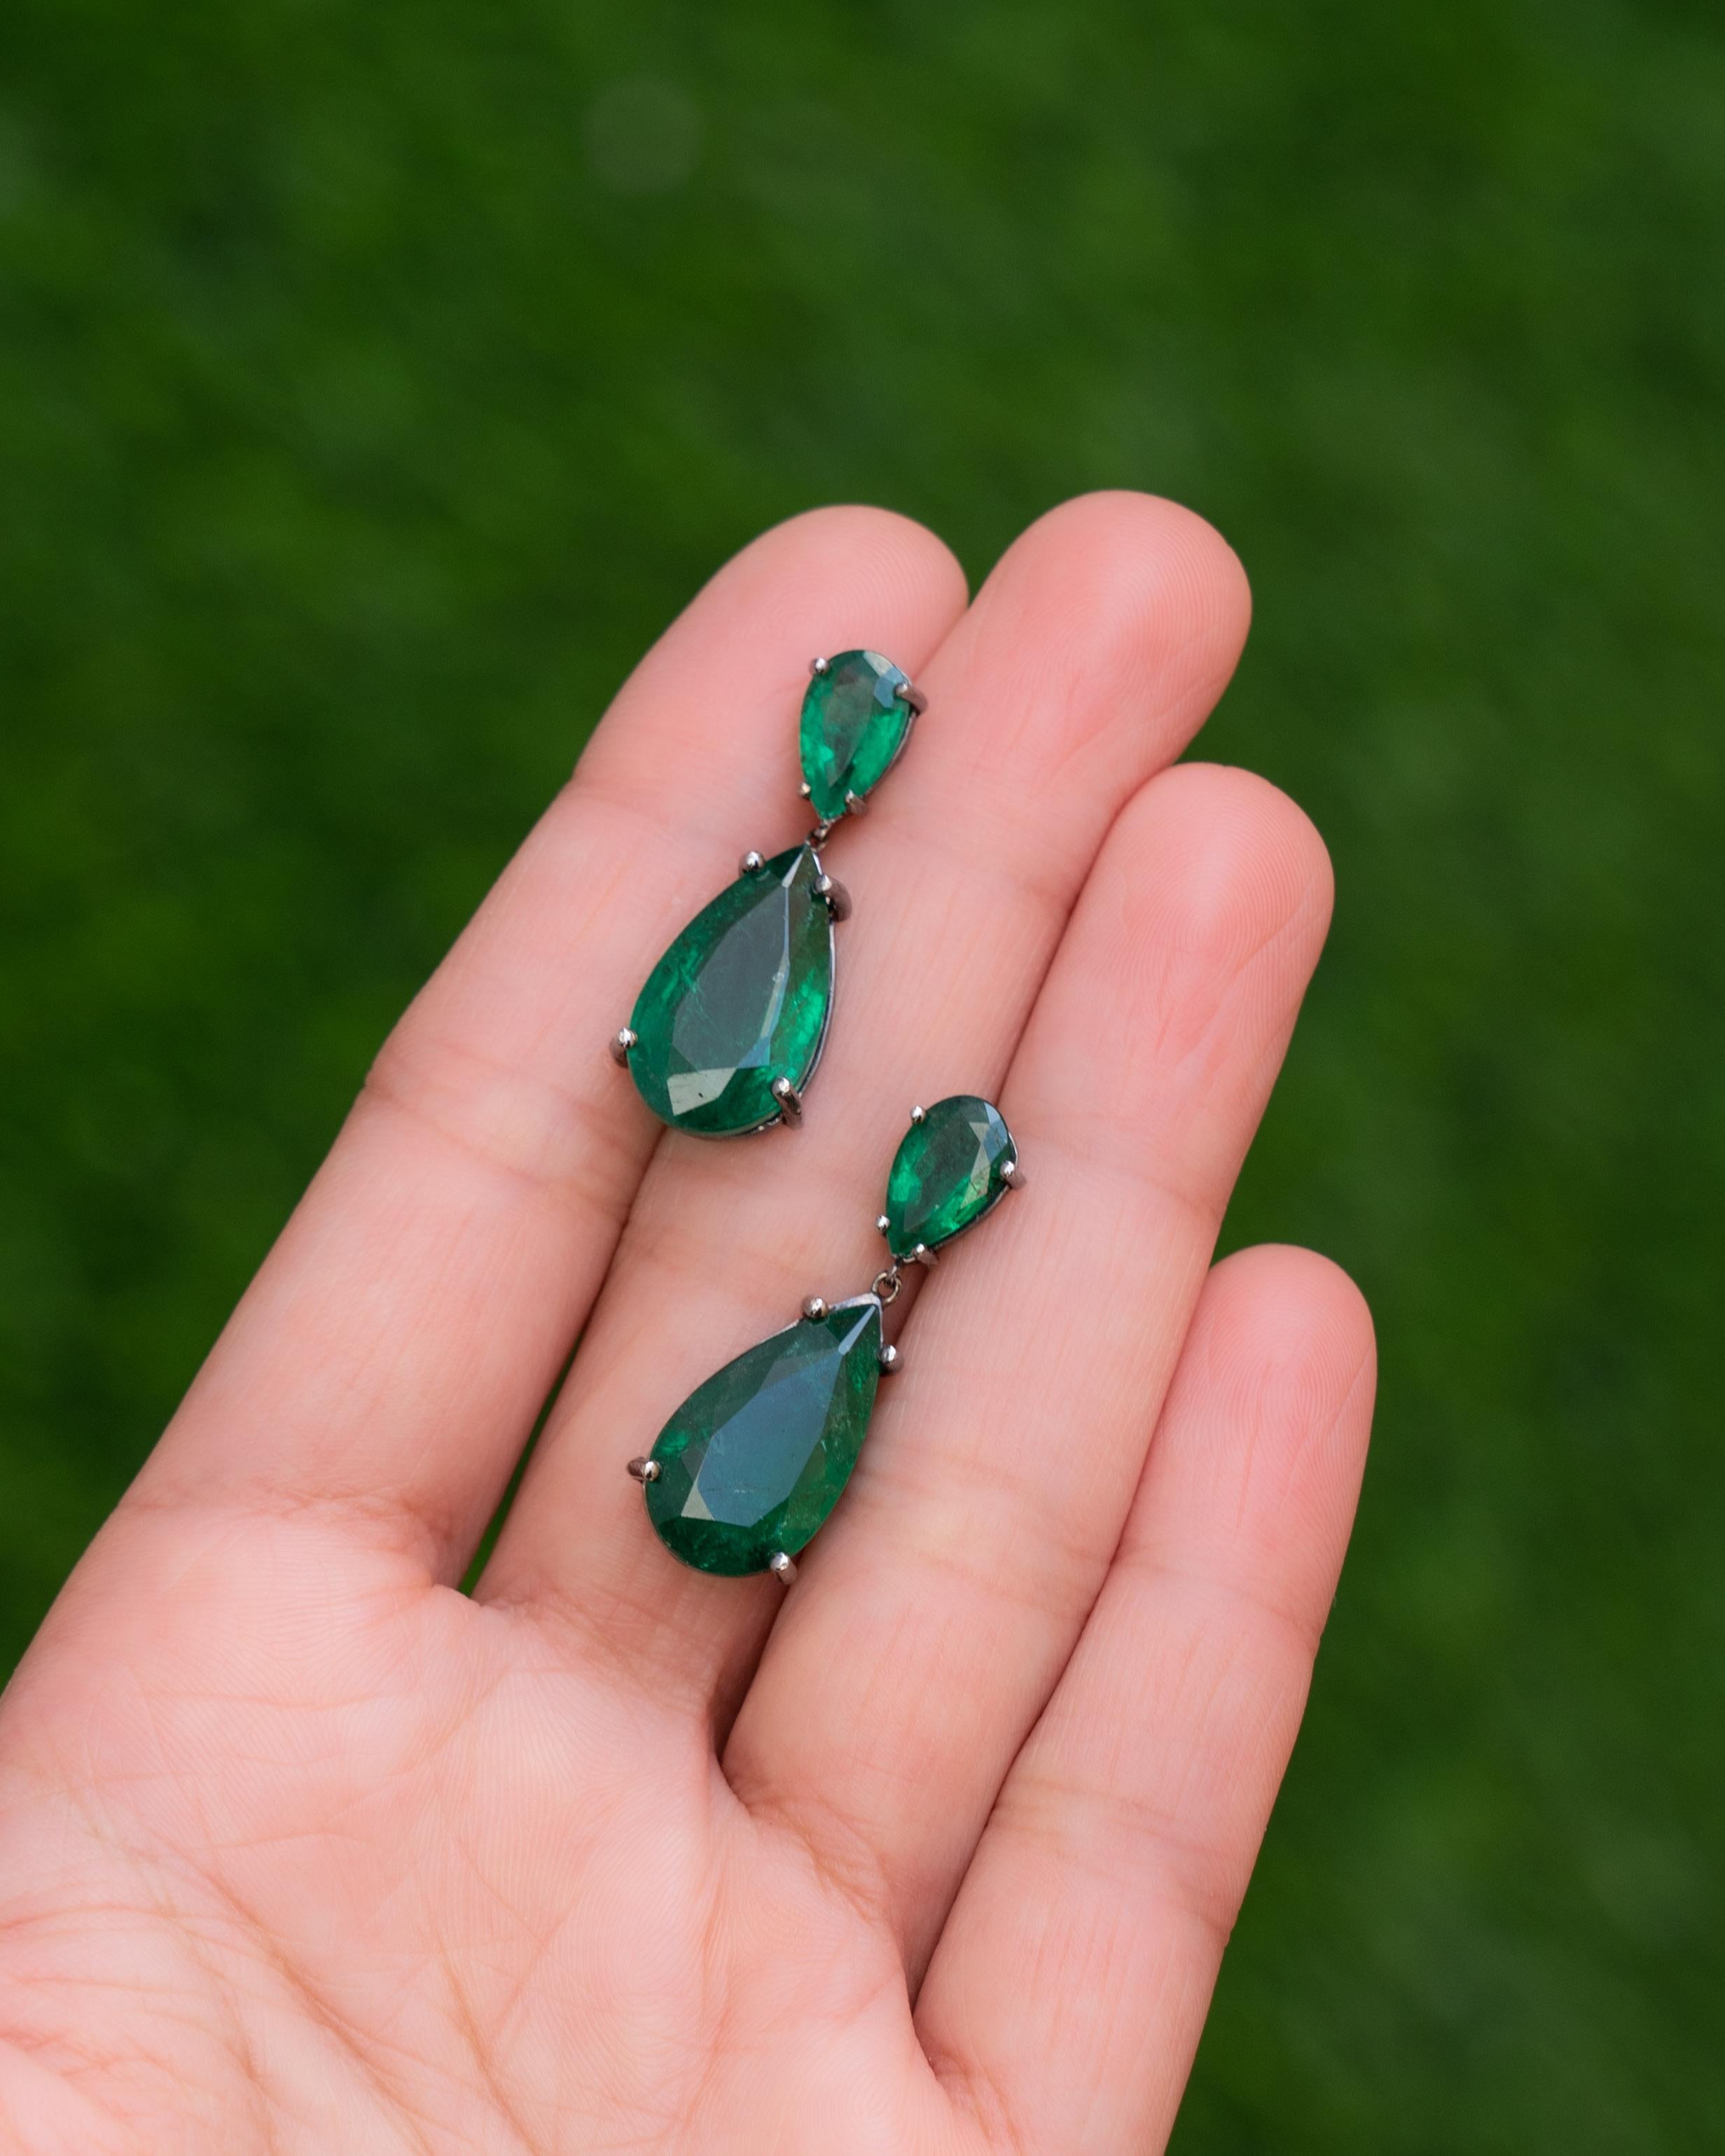 A classic pair of pear-shaped 16.98 carat Zambian Emeralds earrings, set in black rhodium plated 18K Gold. The Emeralds are of top quality, they are transparent with great luster and vivid green color. 
The earrings come with a push-pull backing,